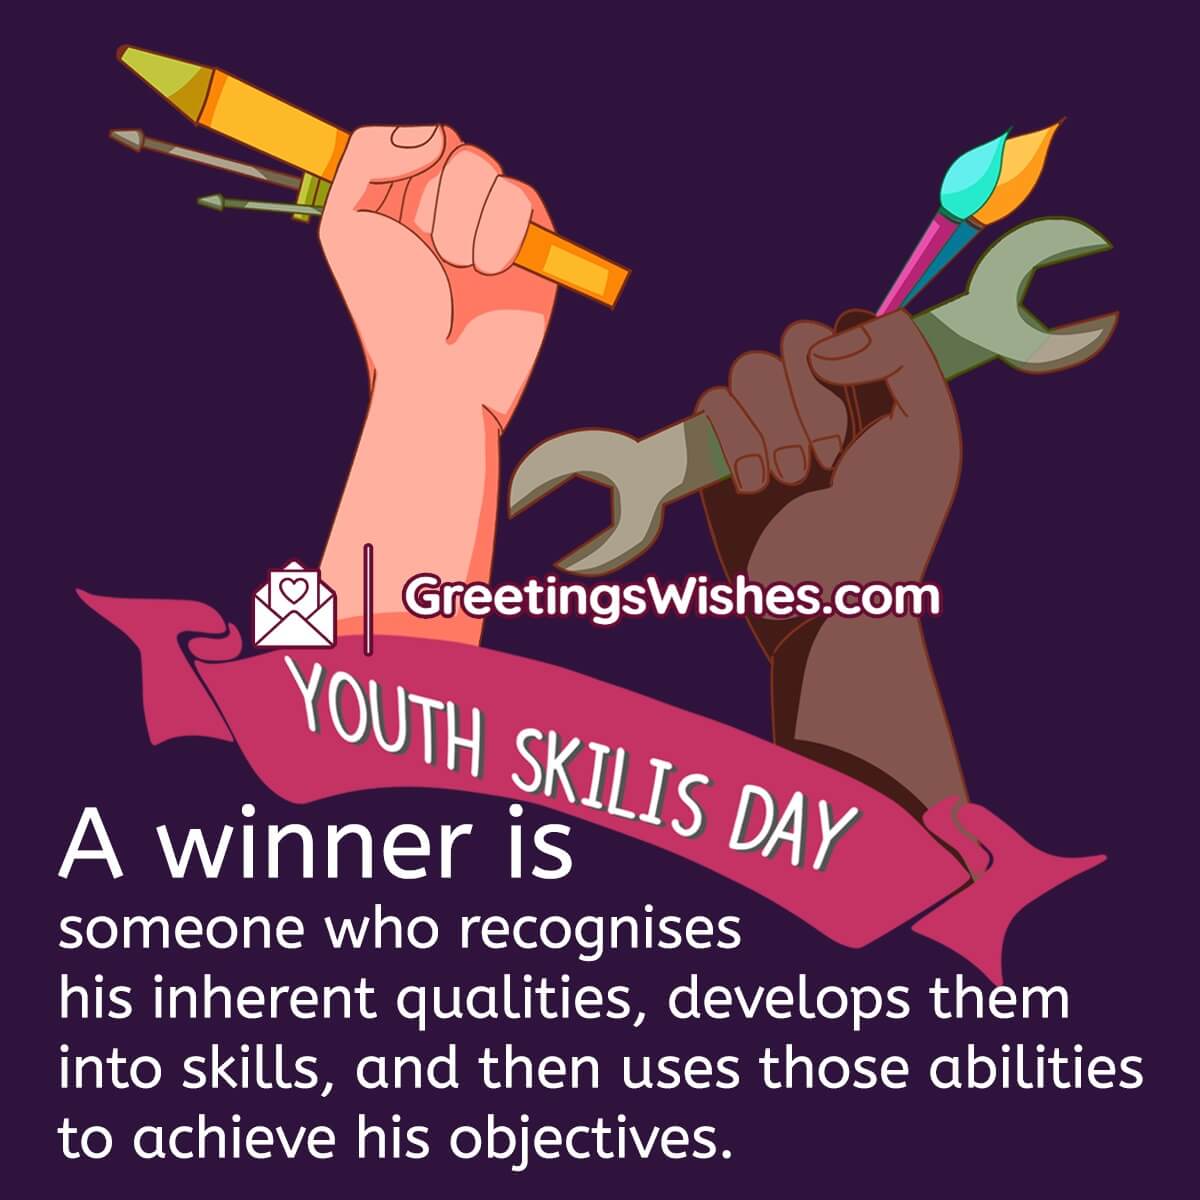 World Youth Skills Day Quotes In English